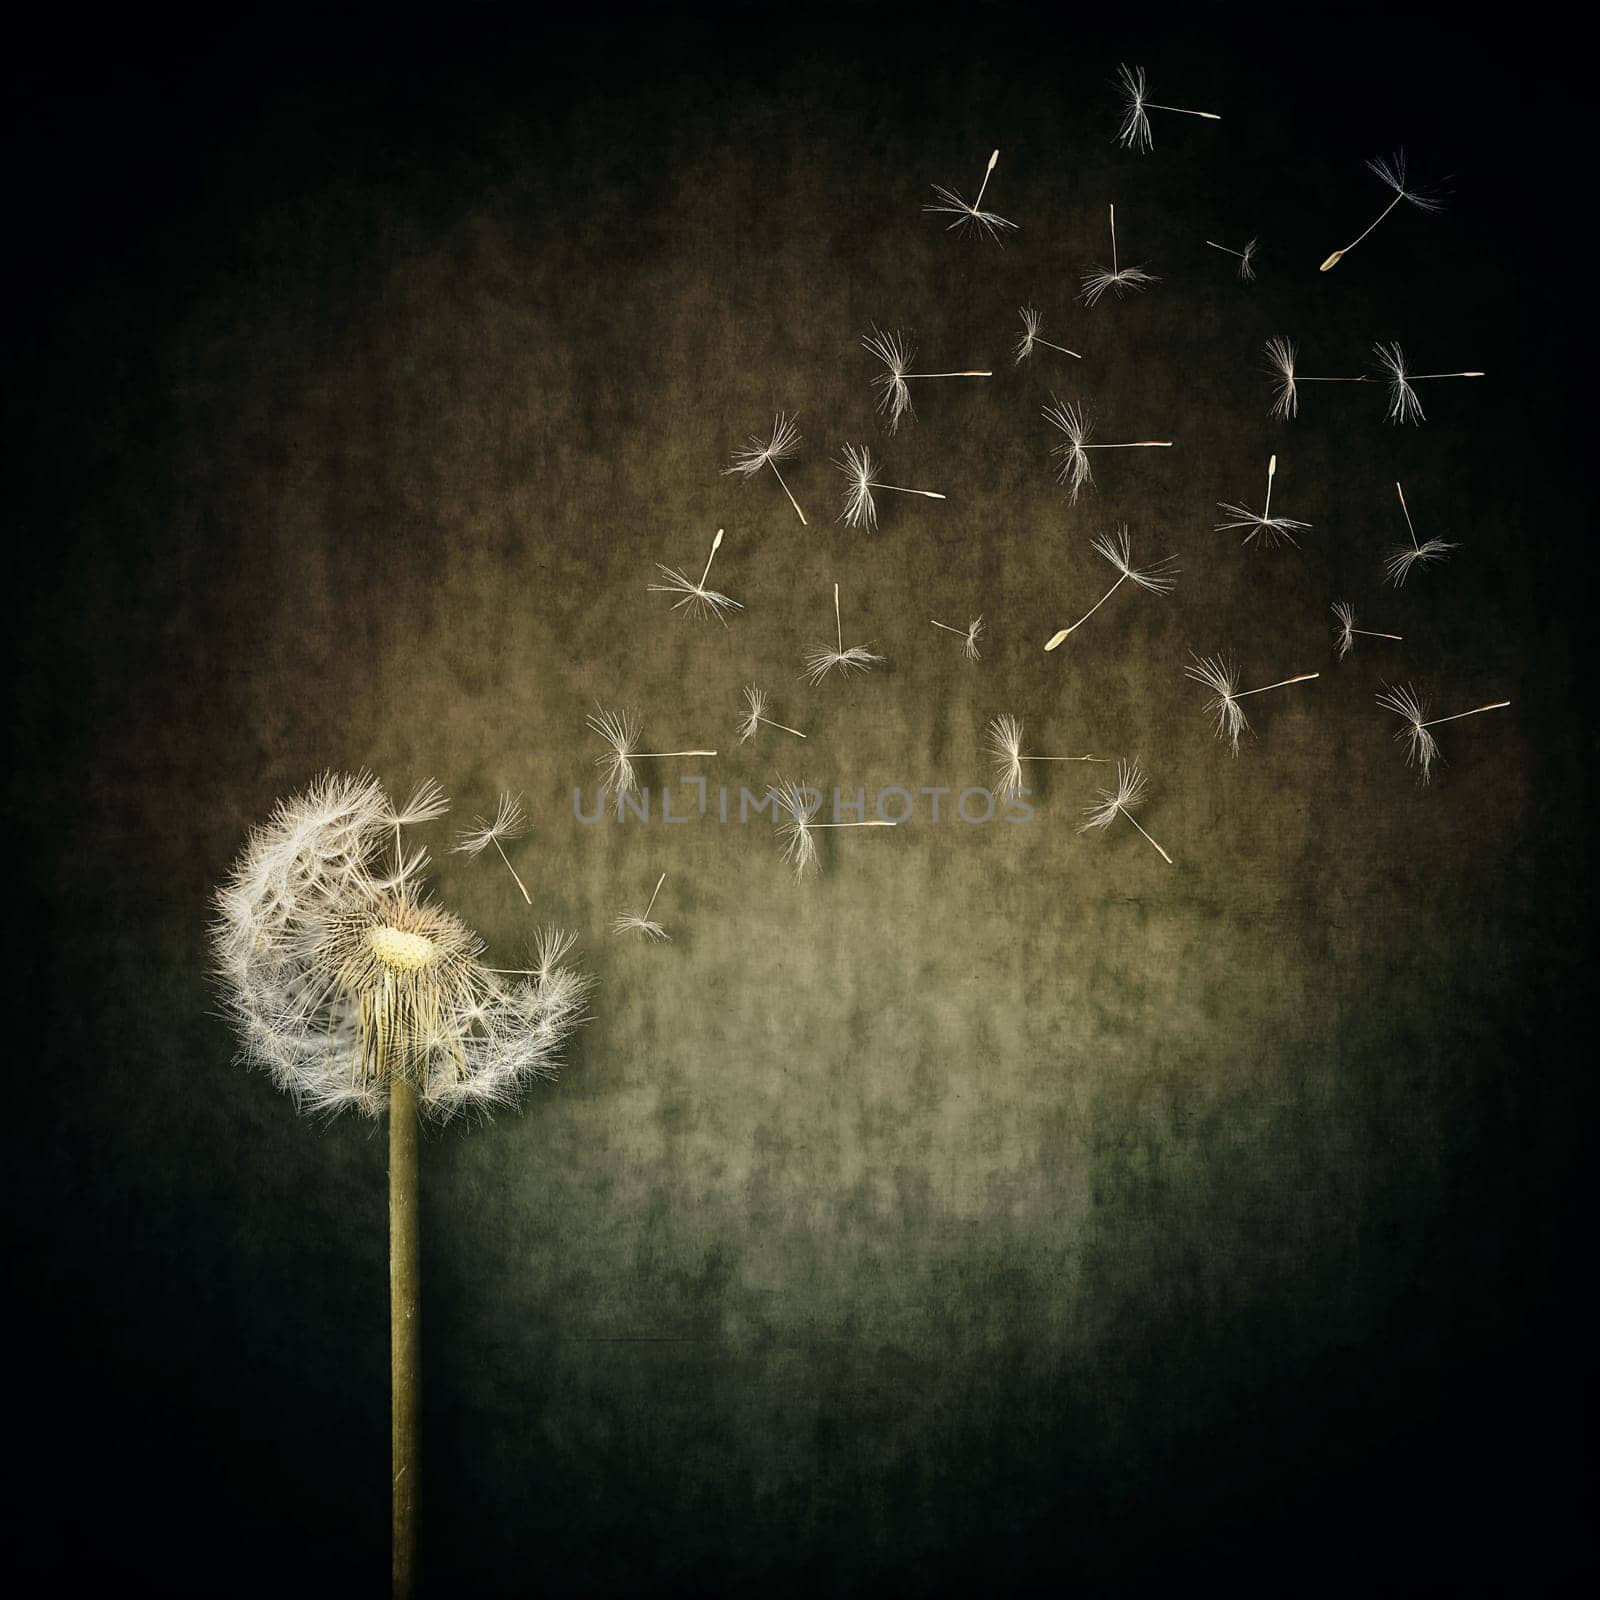 A lot of seeds escape from a dandelion flower on a gray backround. Breaking free, life journey concept